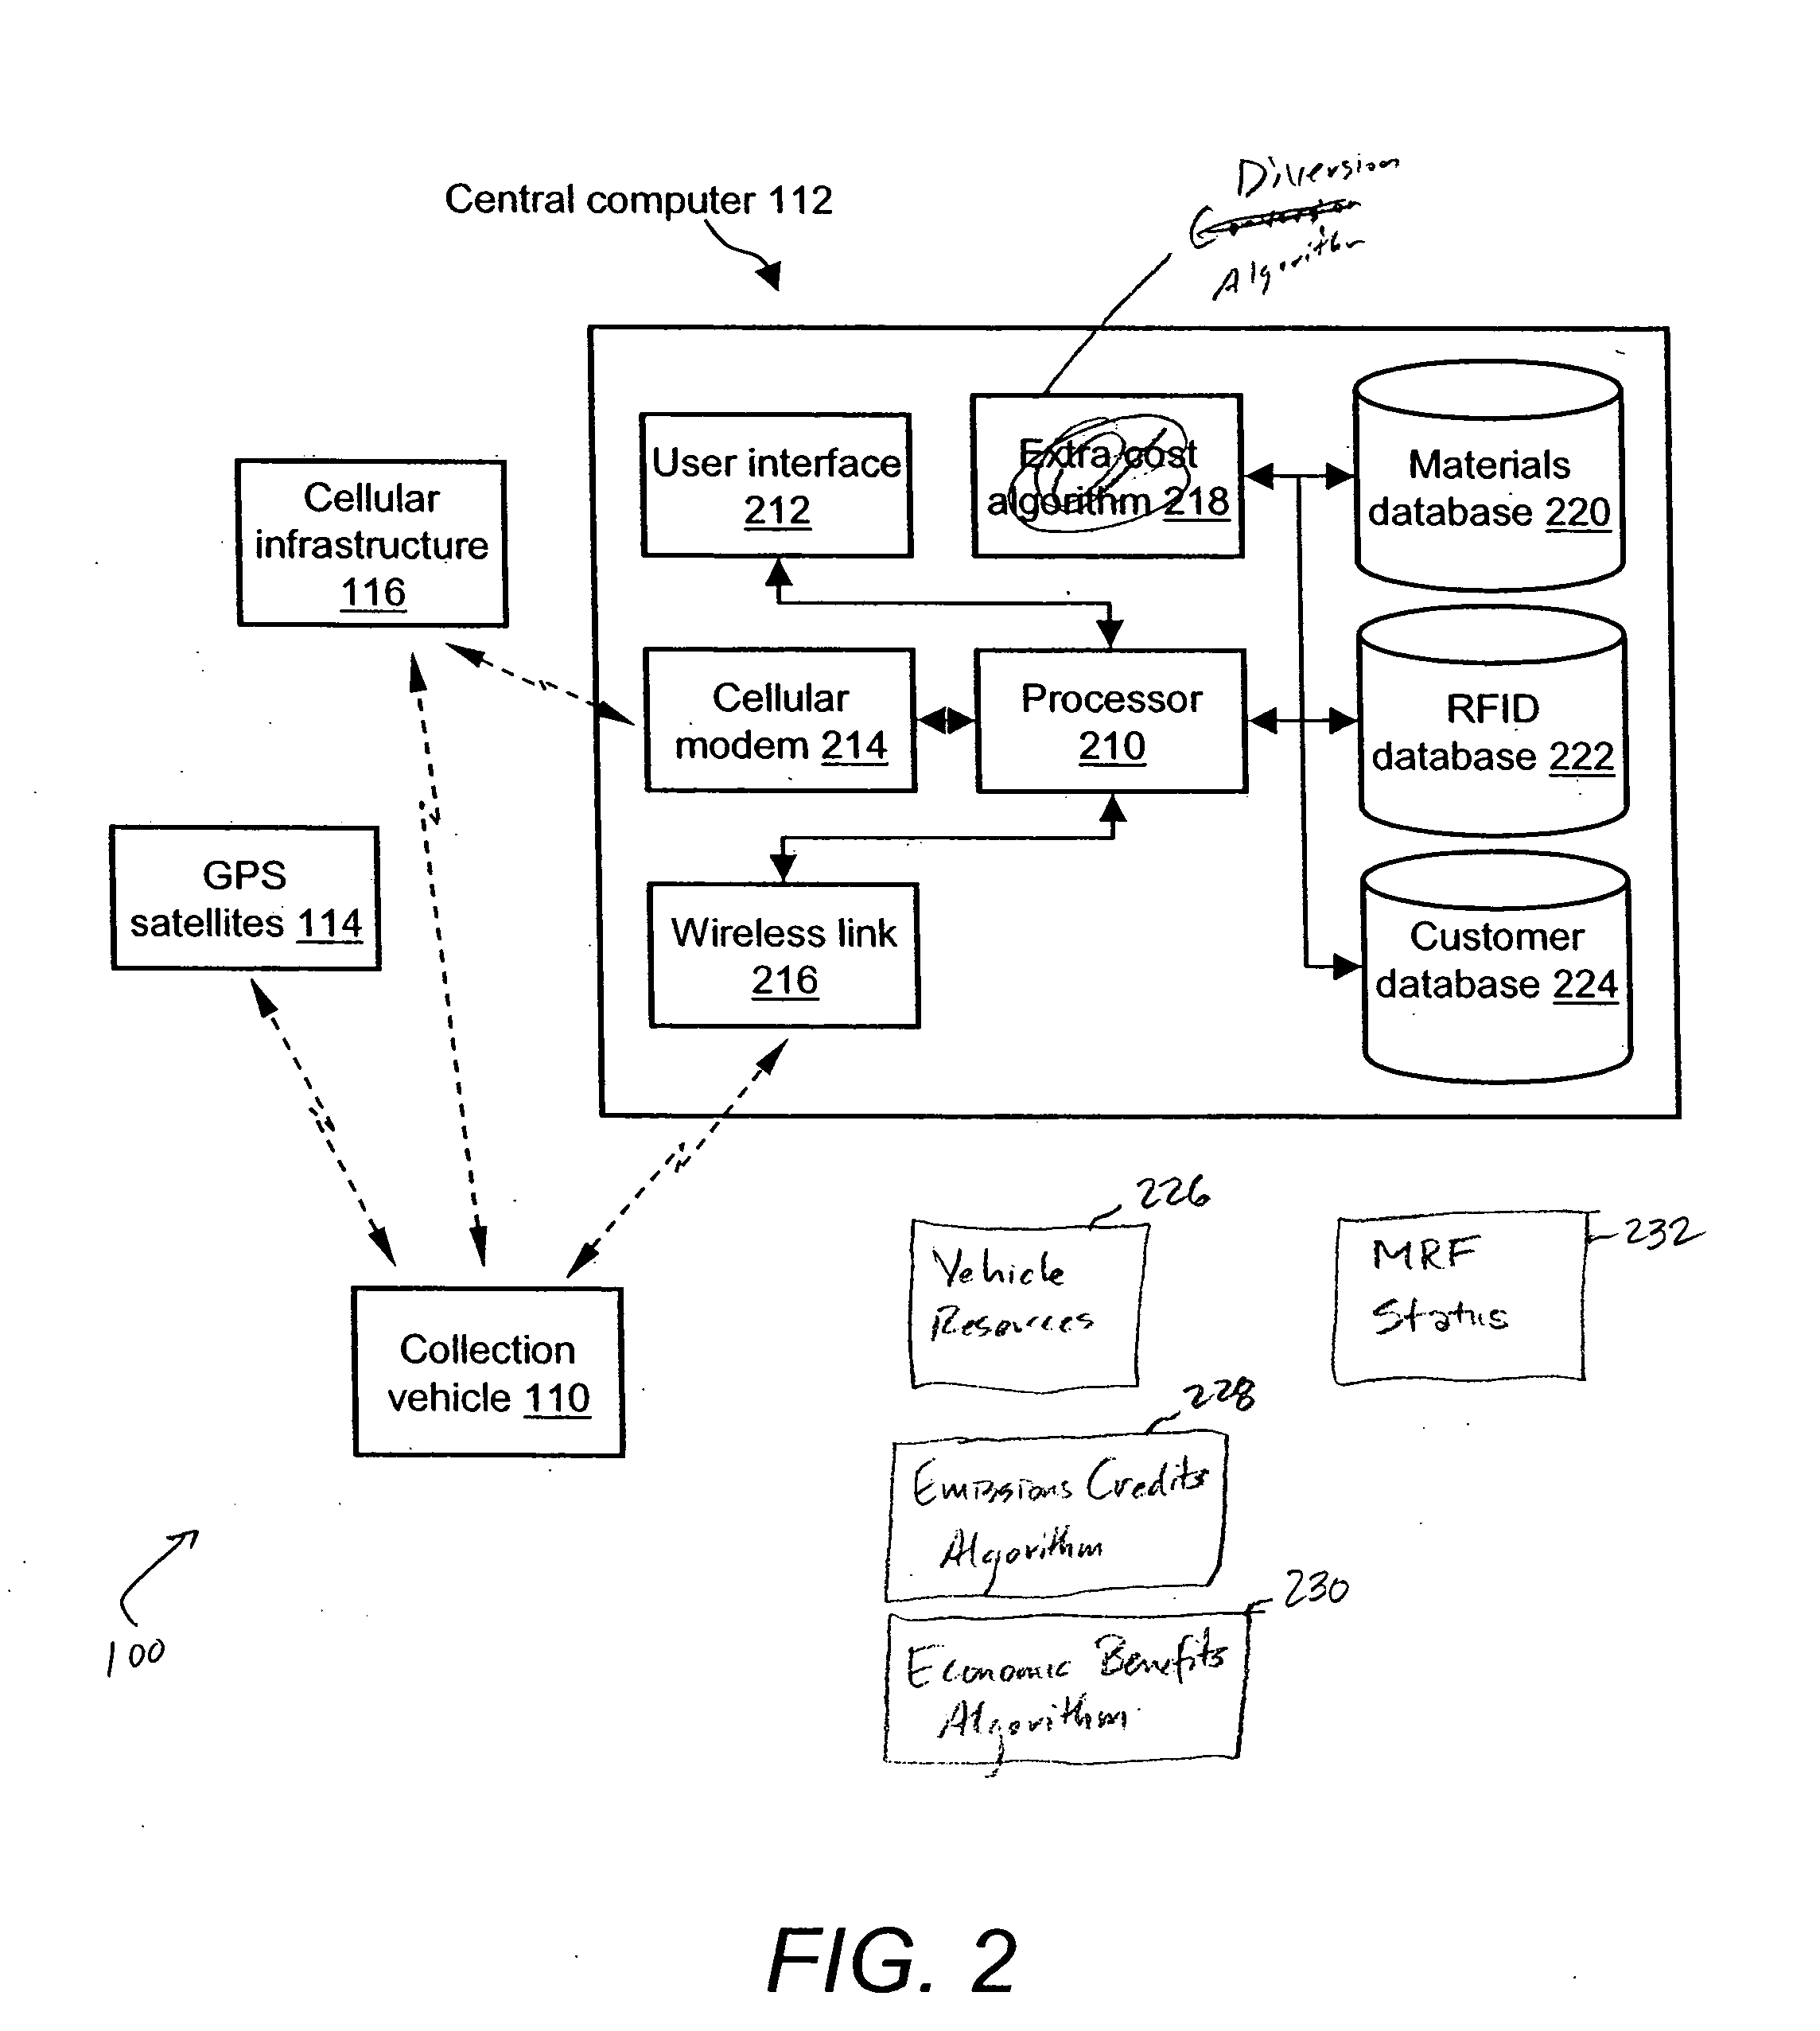 System and methods for a recycling program